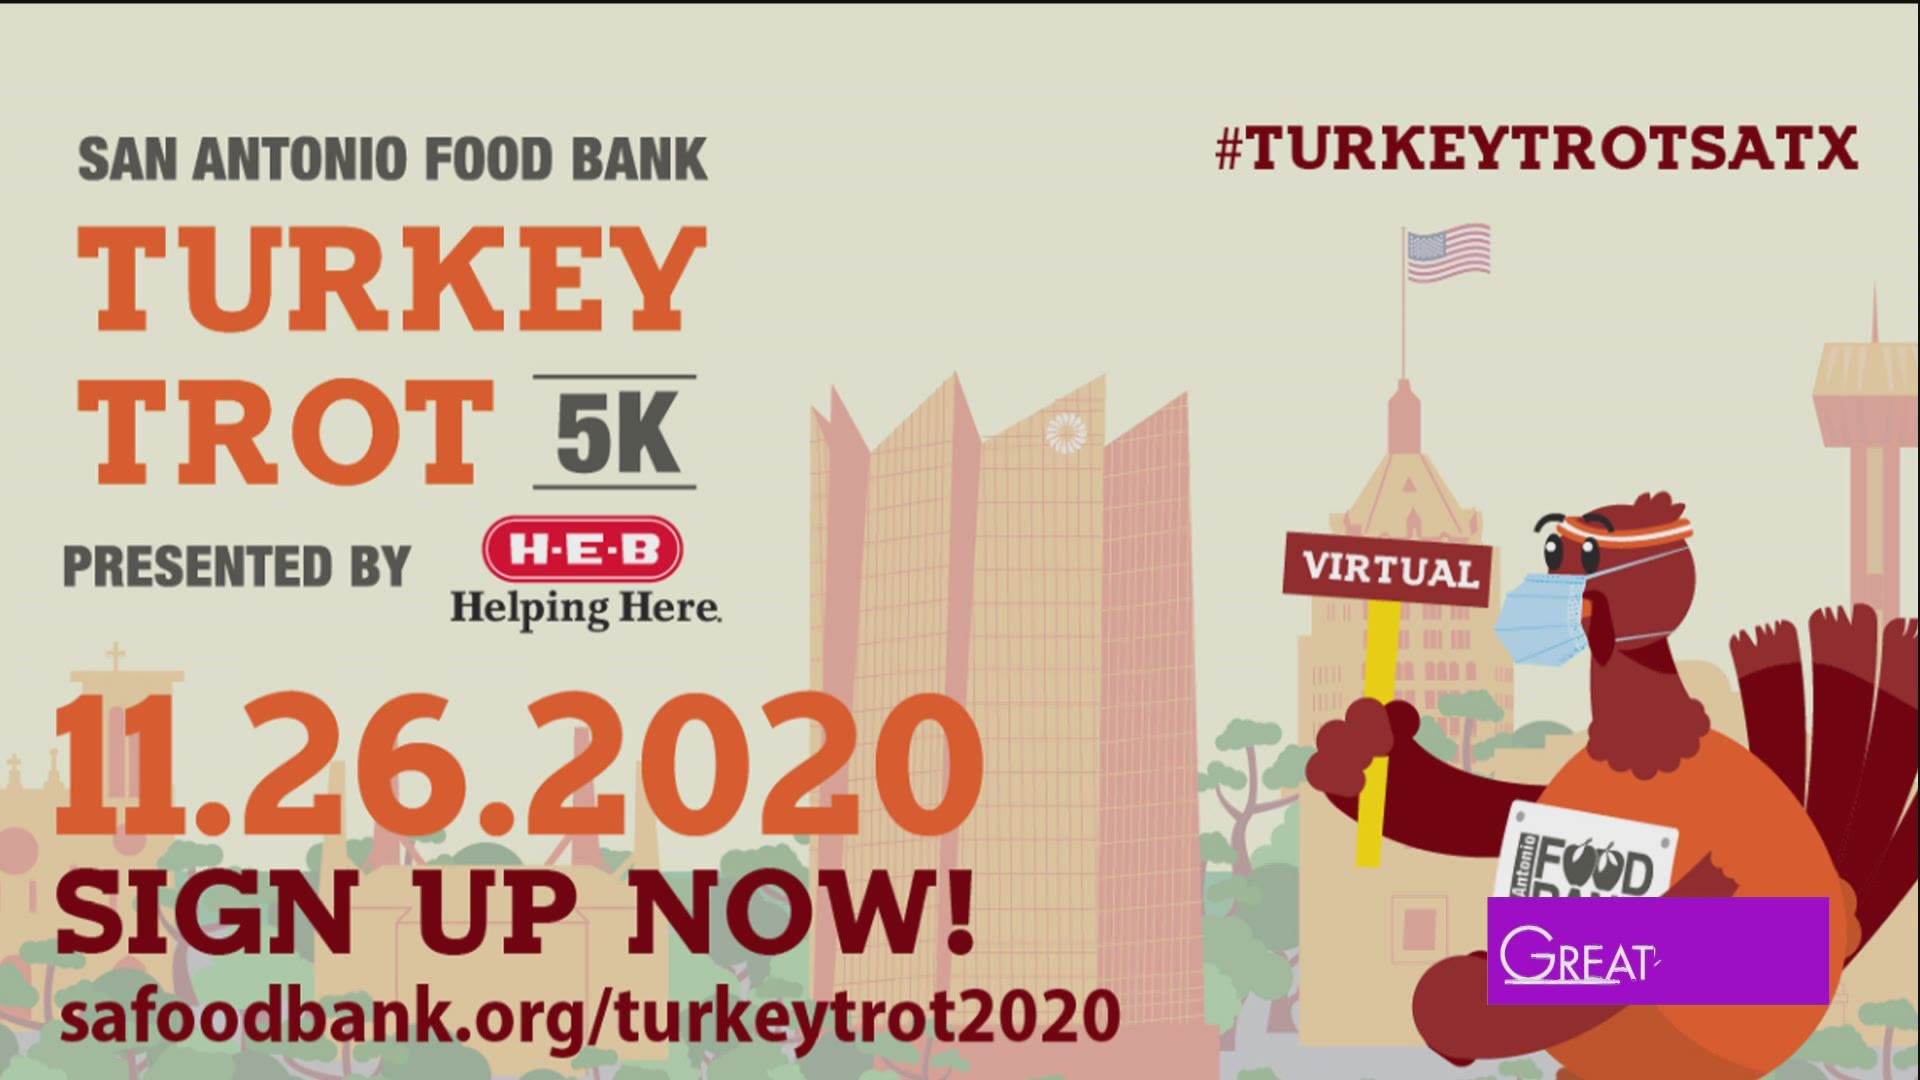 More families are experiencing hunger this holiday season than ever before because of the pandemic. Learn how you can sign up for the virtual Turkey Trot today.